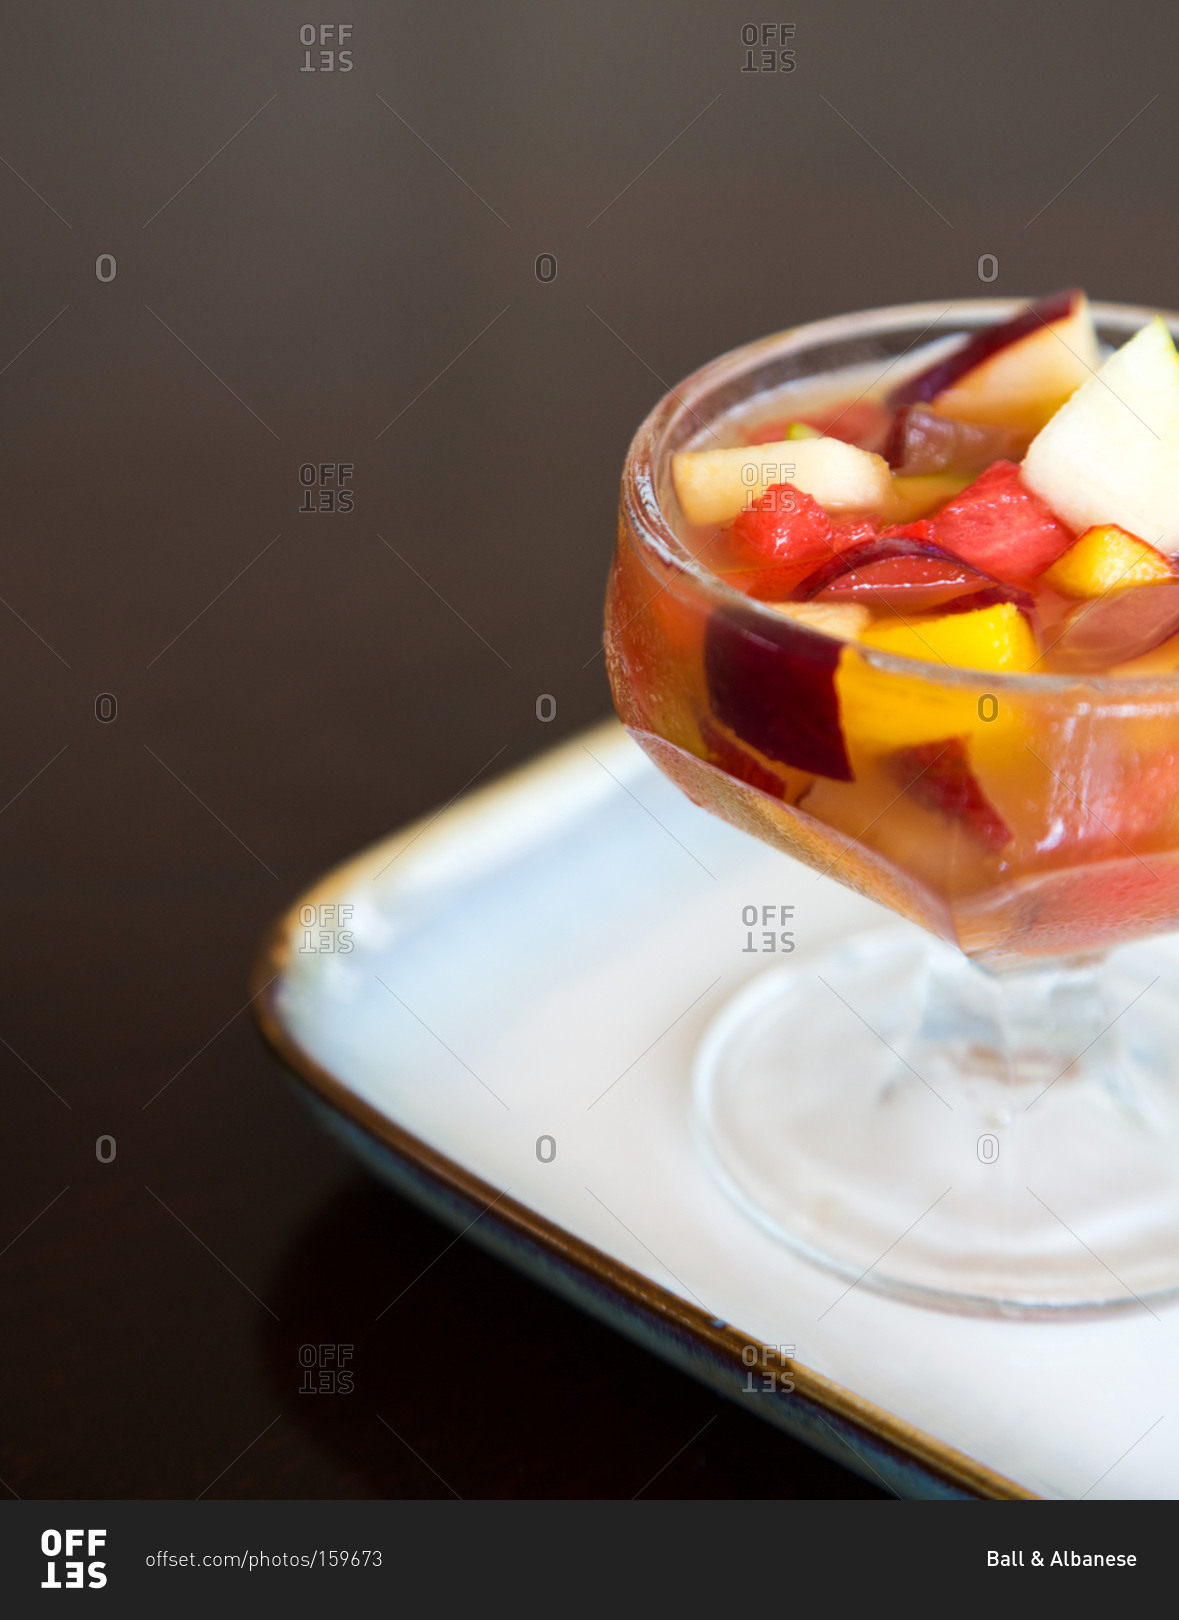 Fruit compote in dessert glass